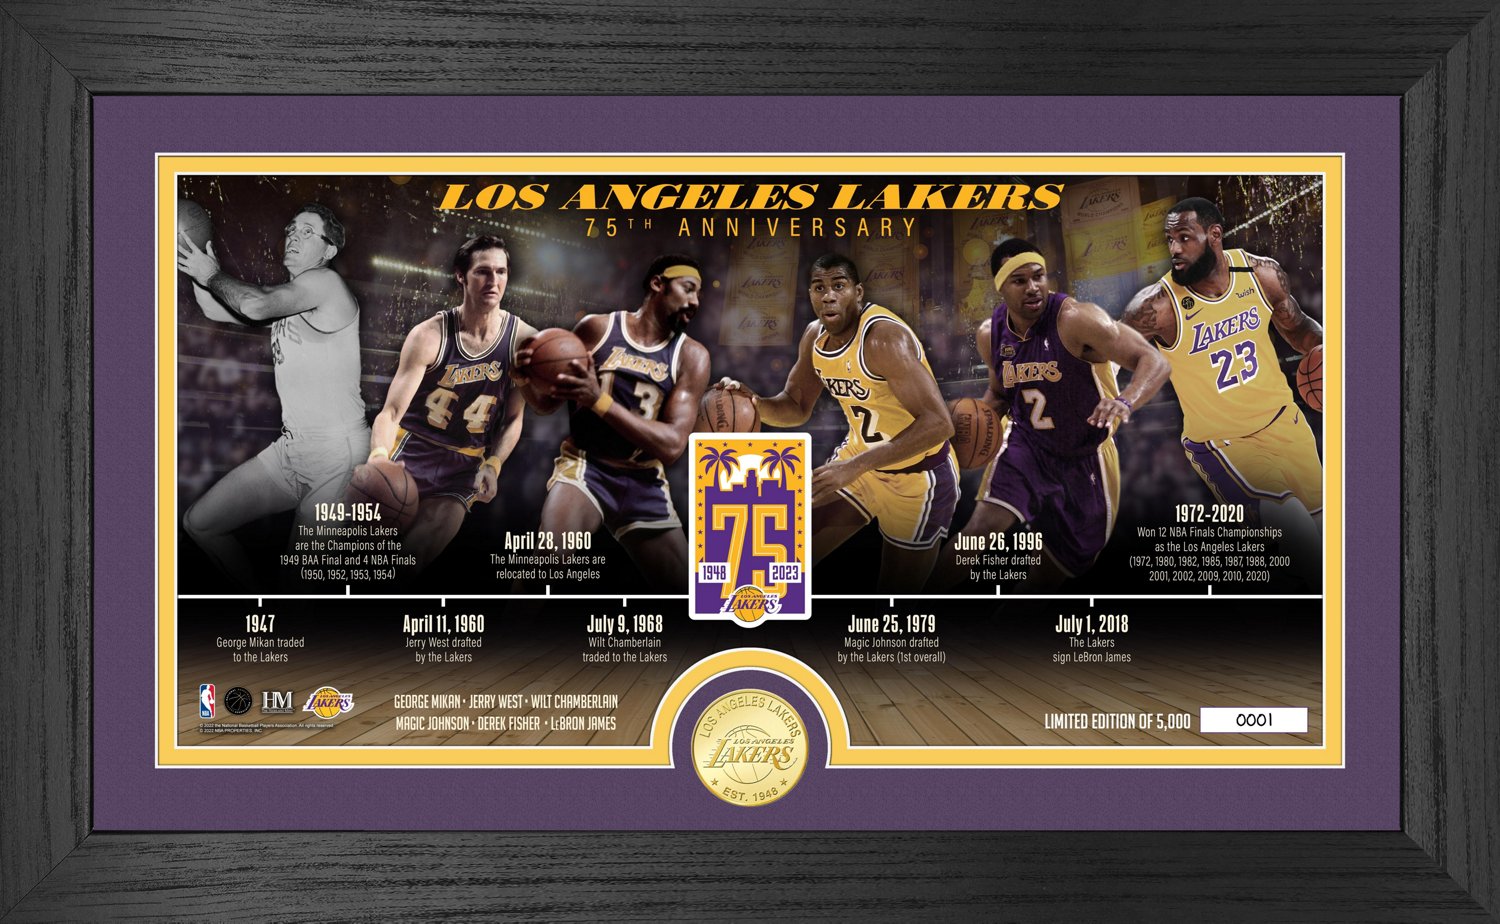 The Highland Mint Los Angeles Lakers 75th Anniversary Panoramic Timeline  Bronze Coin Mint Photo